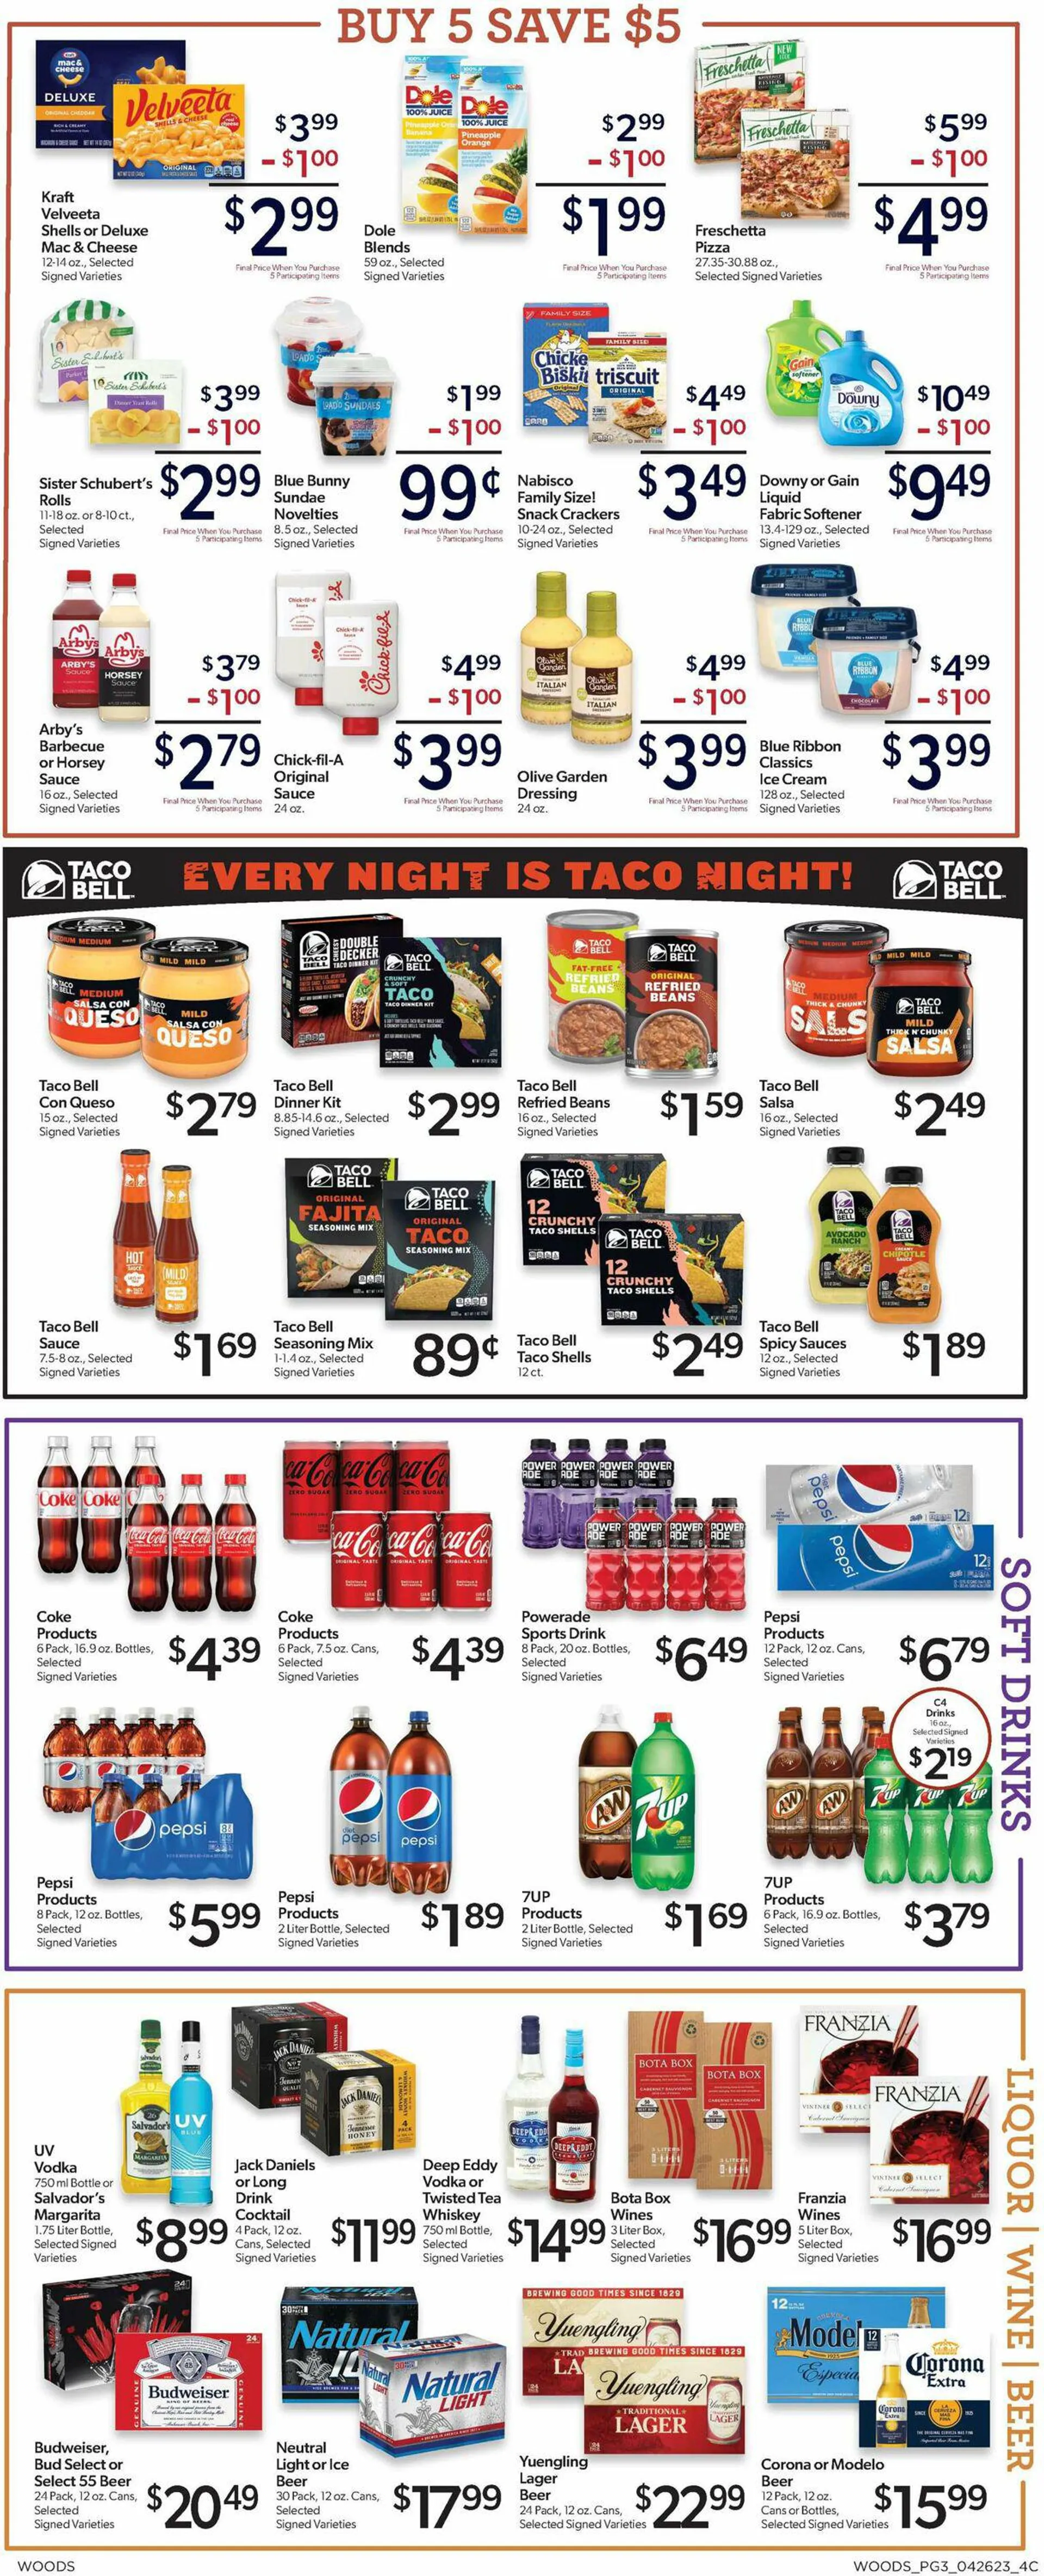 Woods Supermarket Current weekly ad - 3